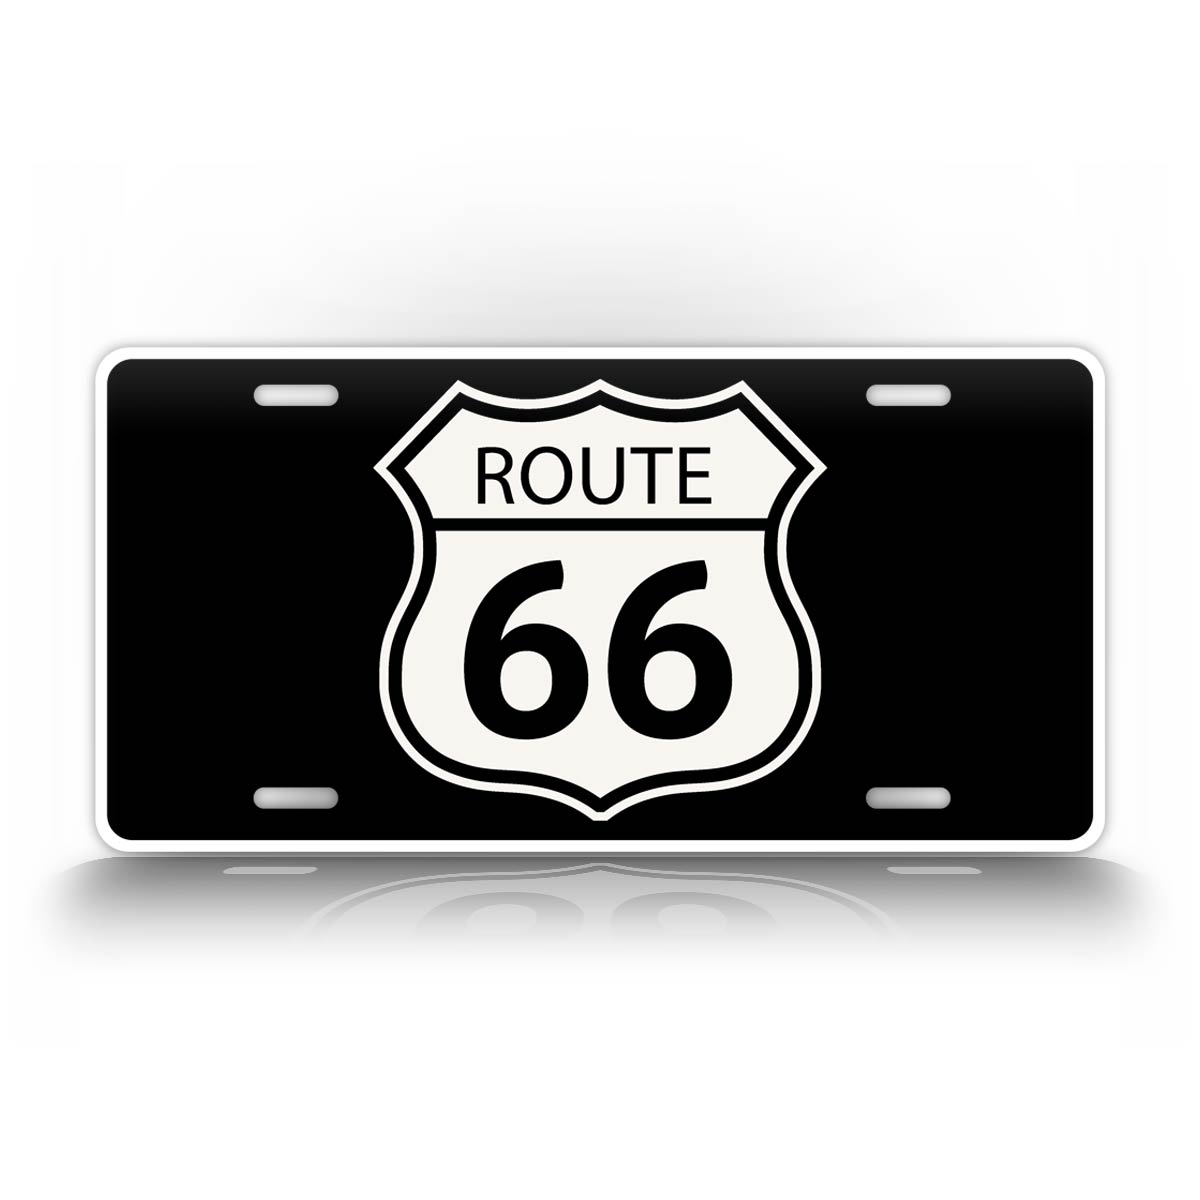 Classic Black And White Route 66 License Plate 